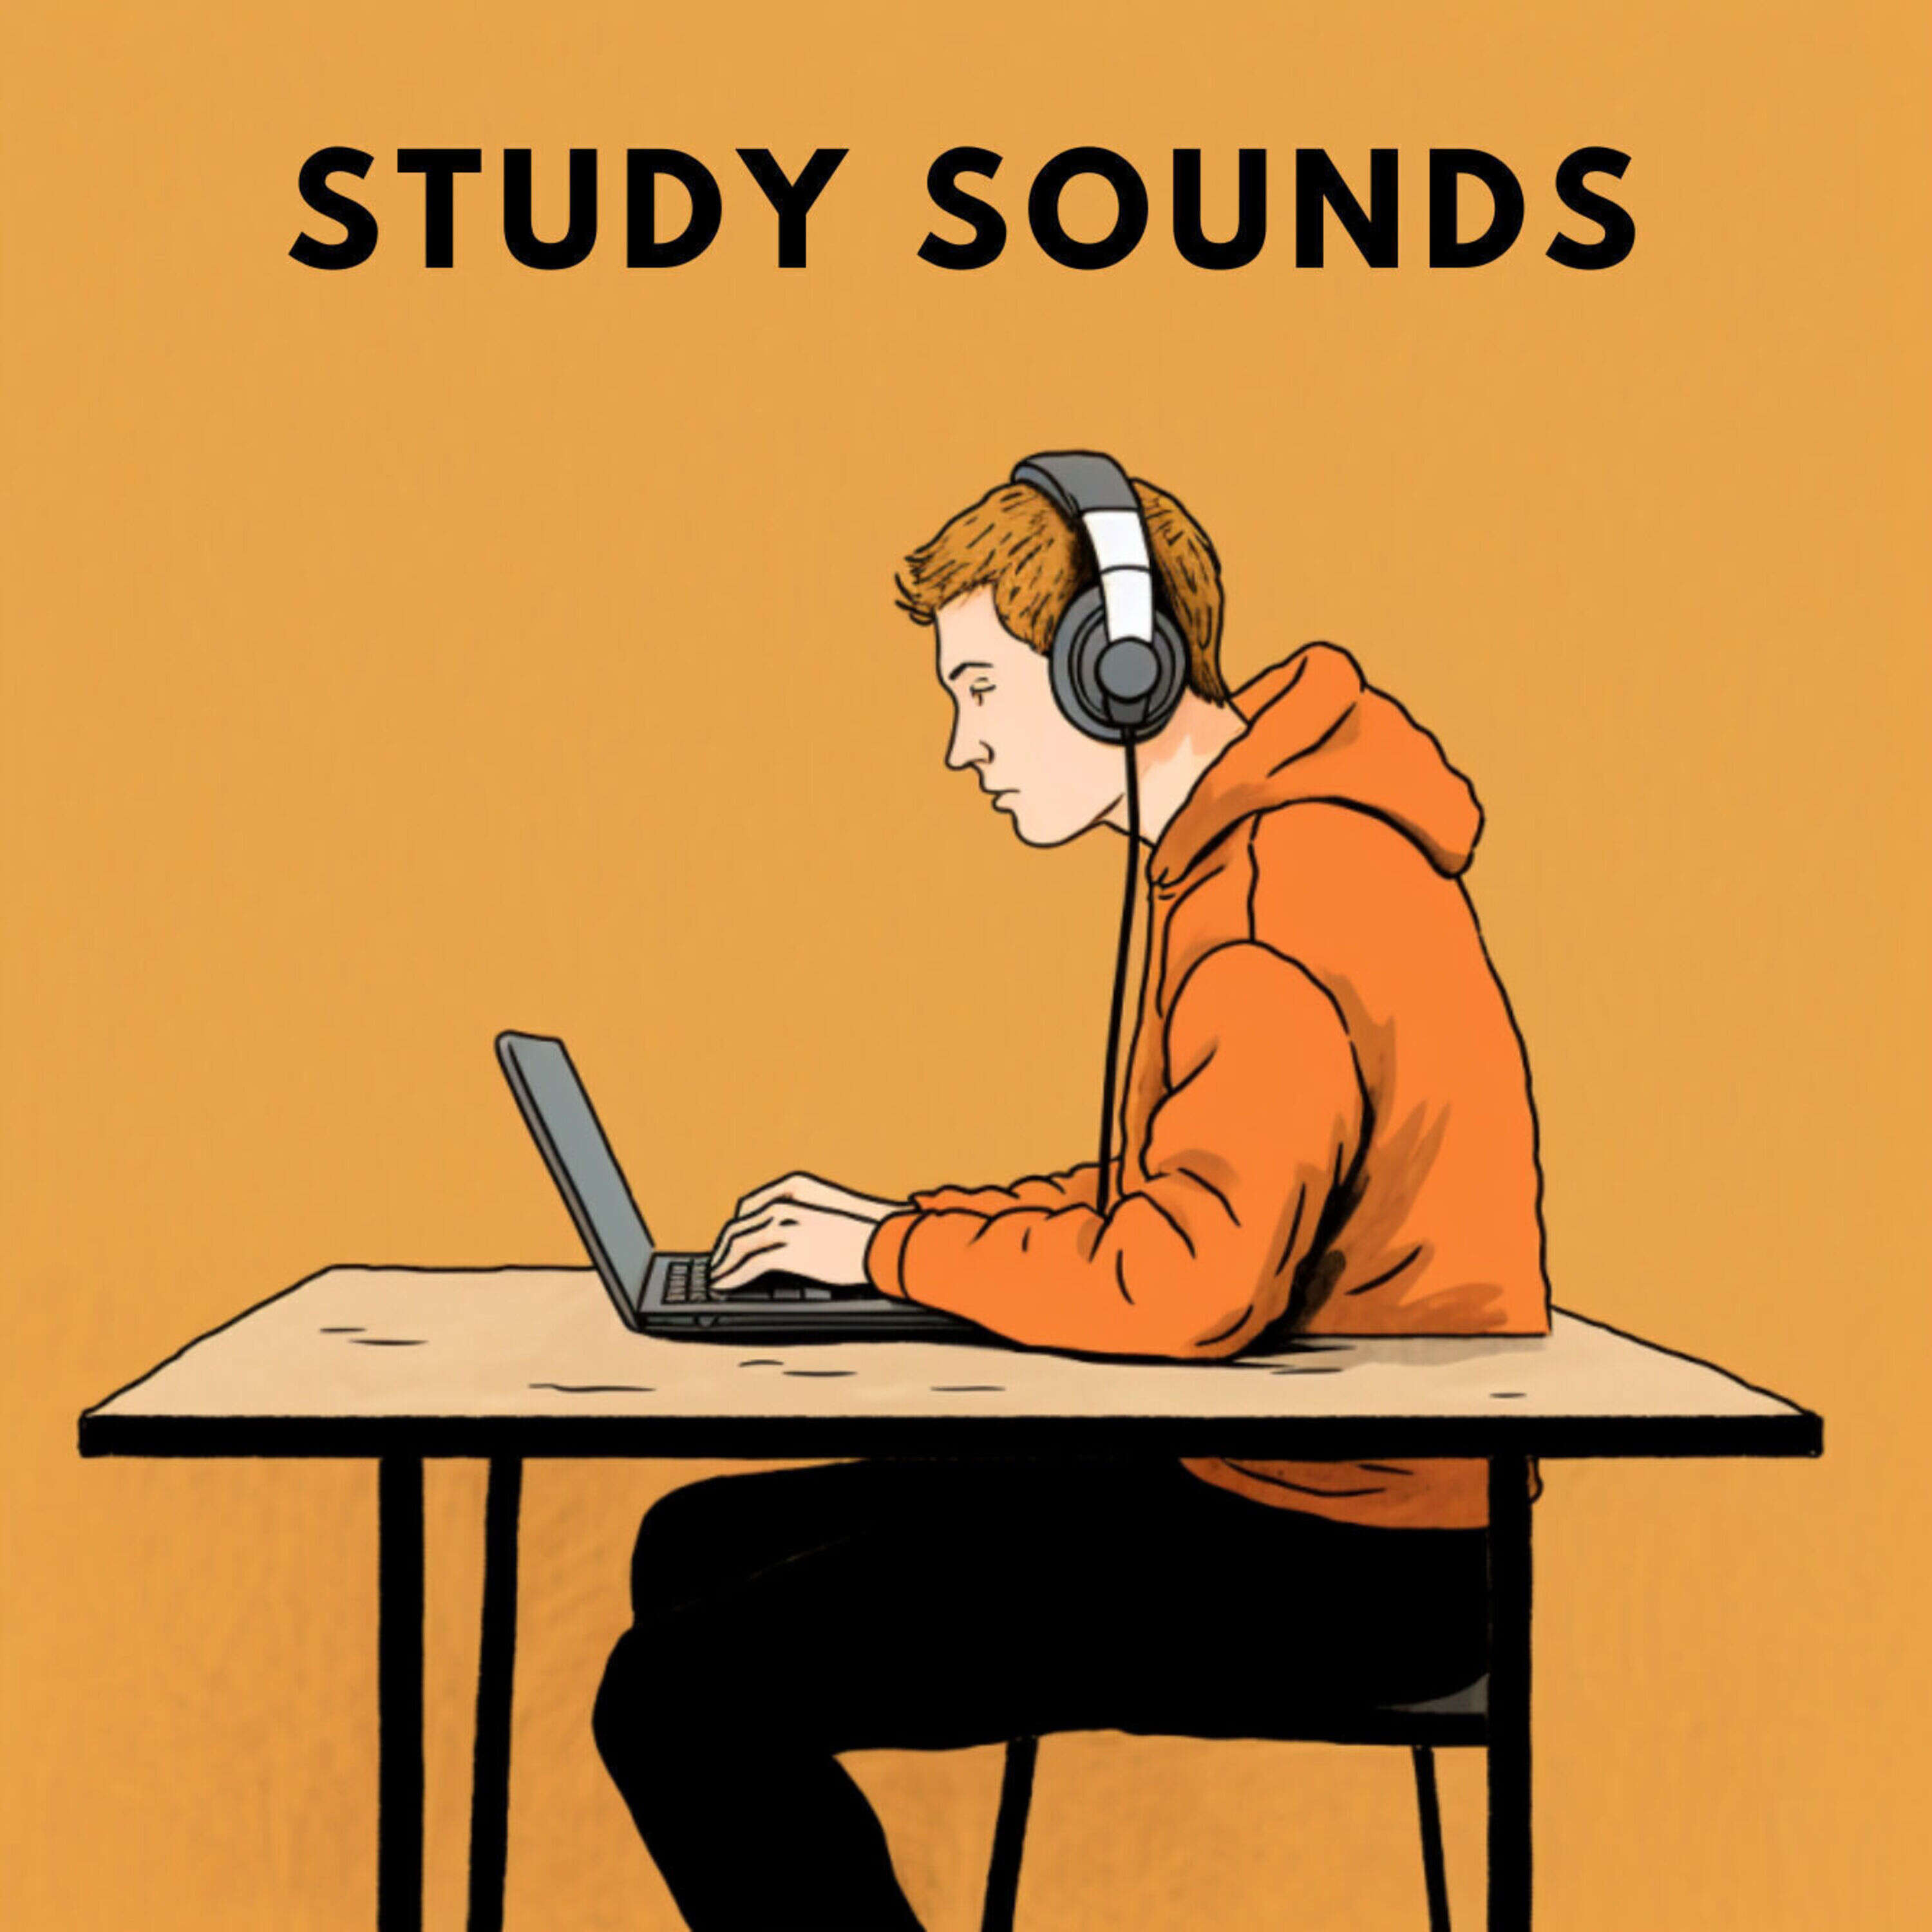 The Best of Classical sounds To Study